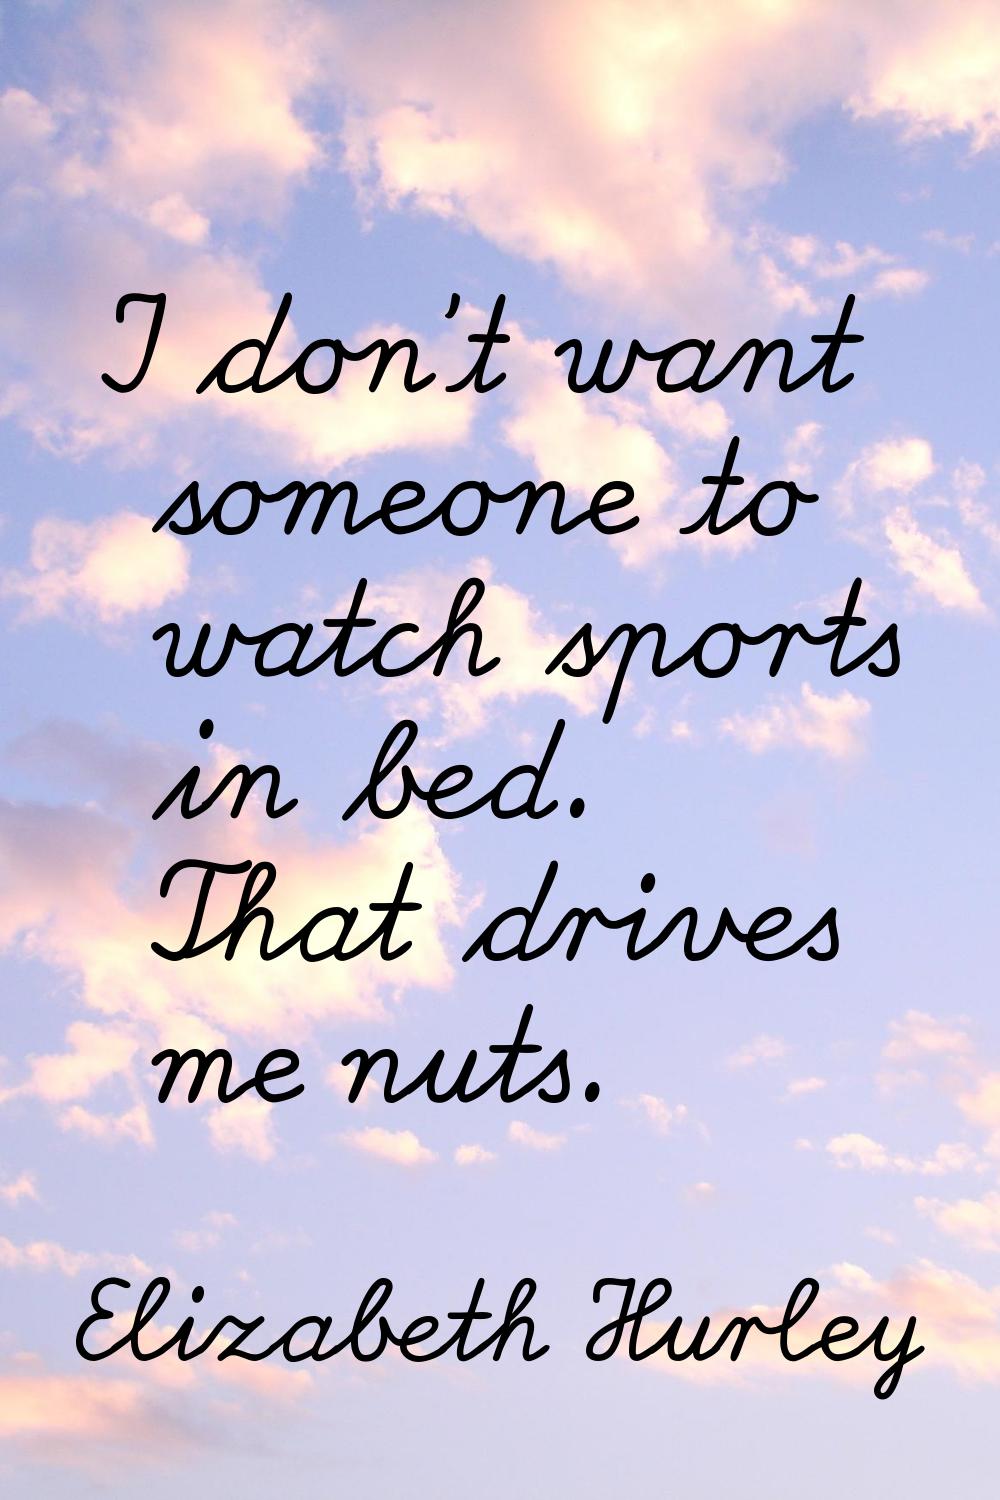 I don't want someone to watch sports in bed. That drives me nuts.